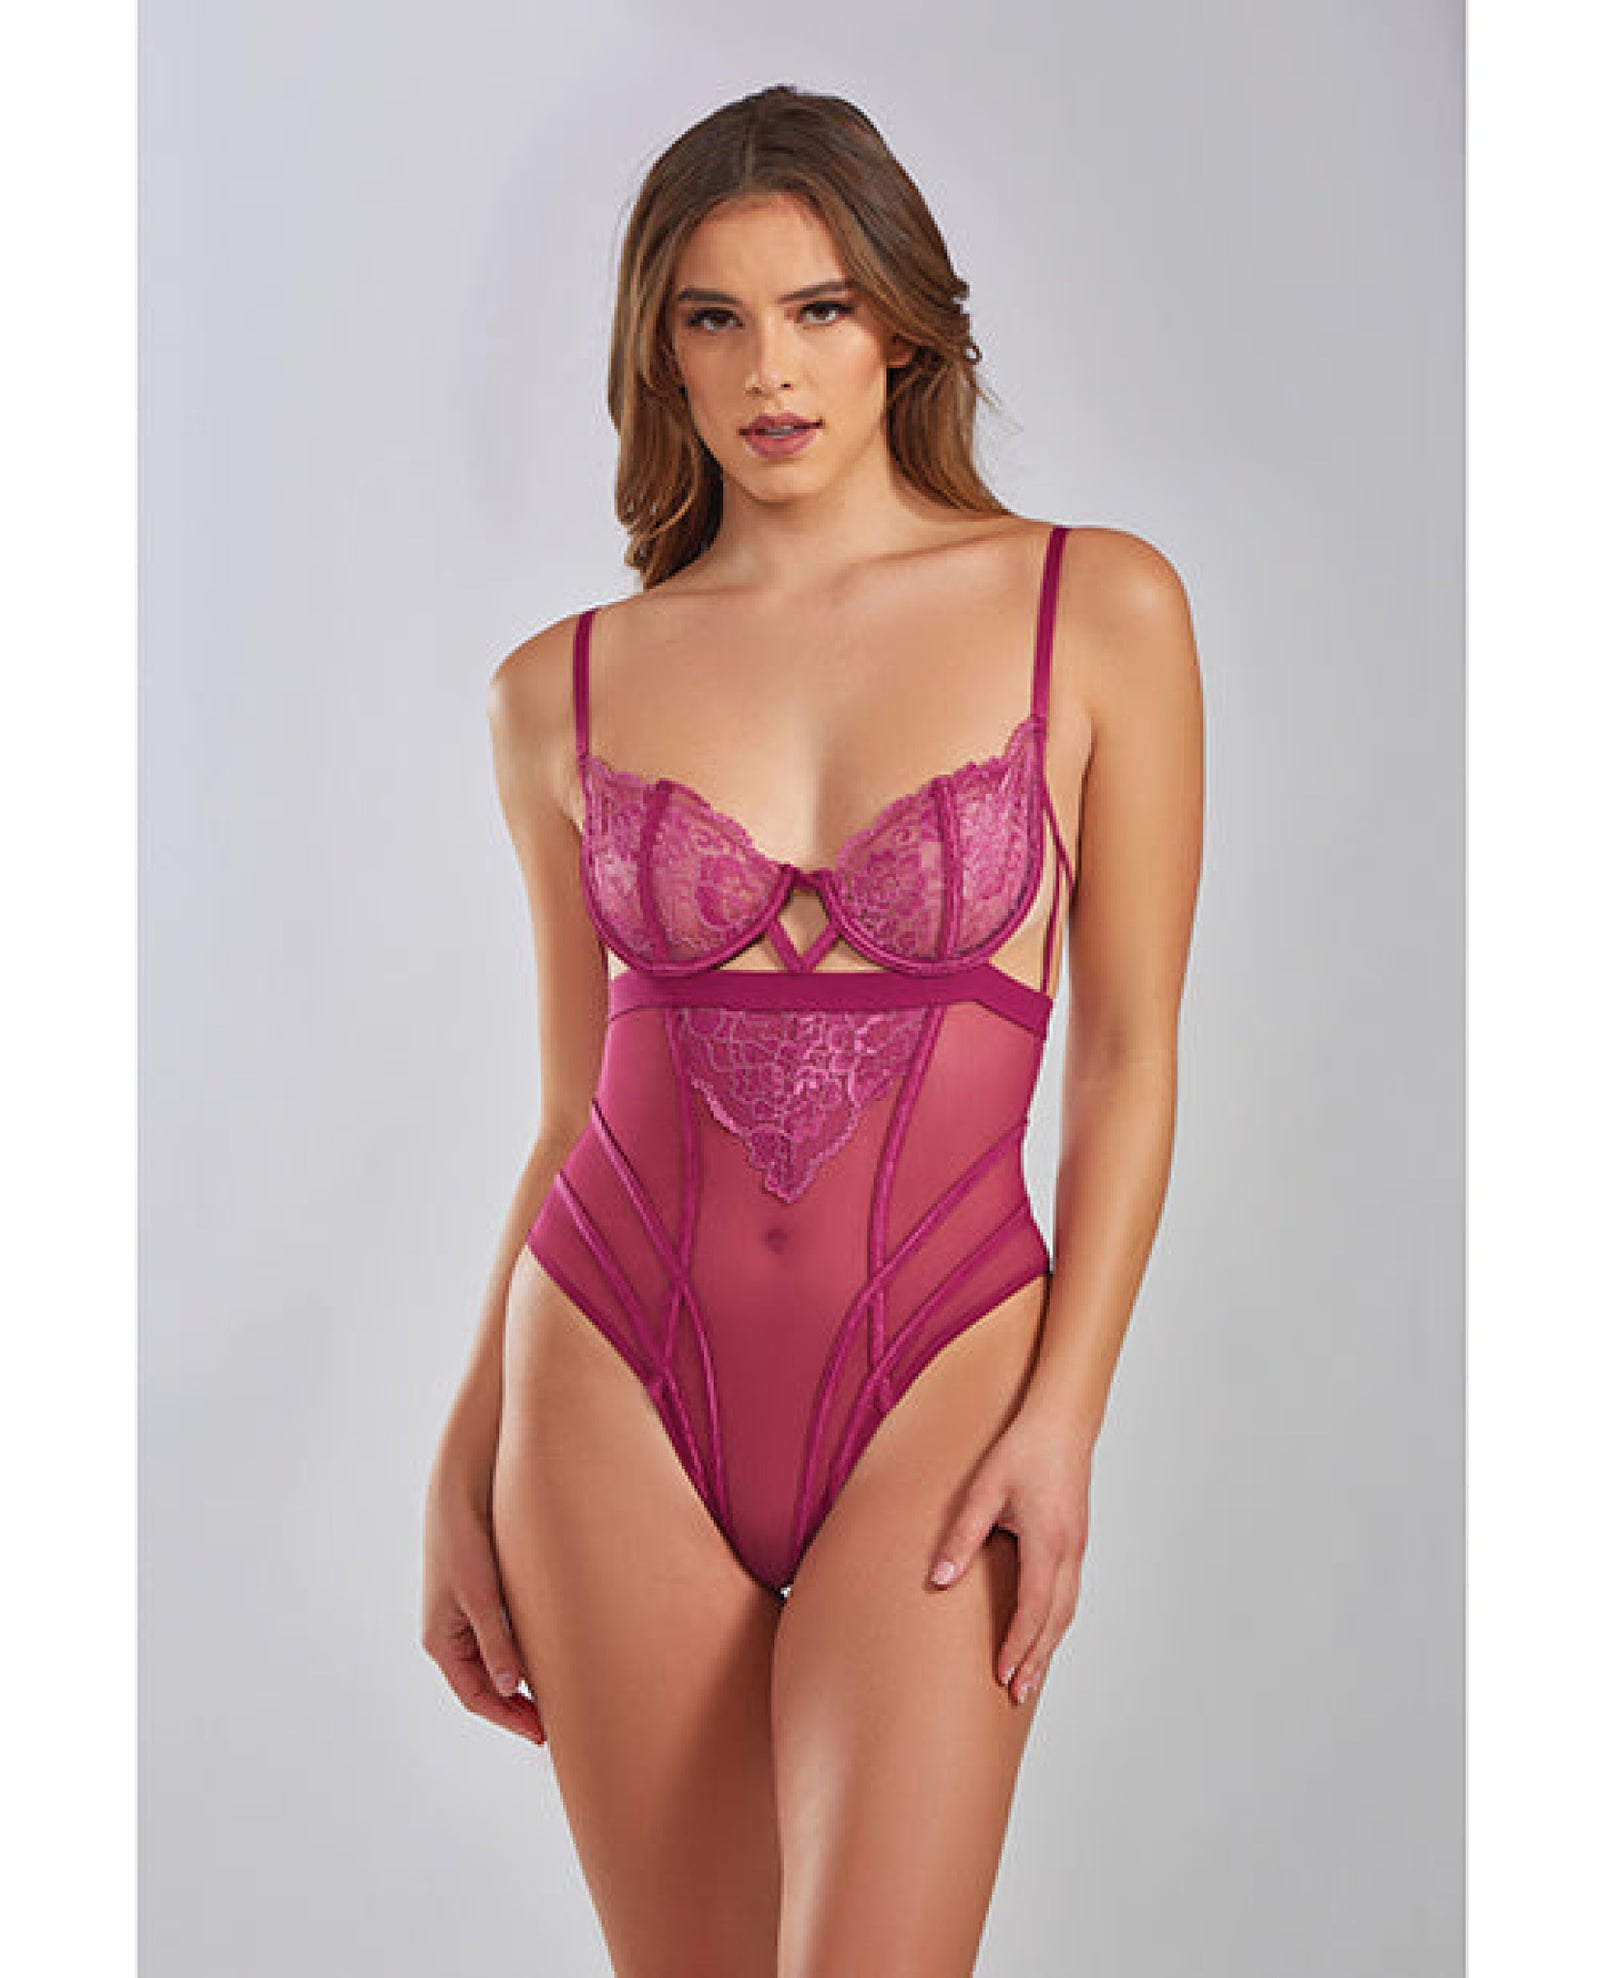 Quinn Cross Dyed Galloon Lace & Mesh Teddy Wine Icollection